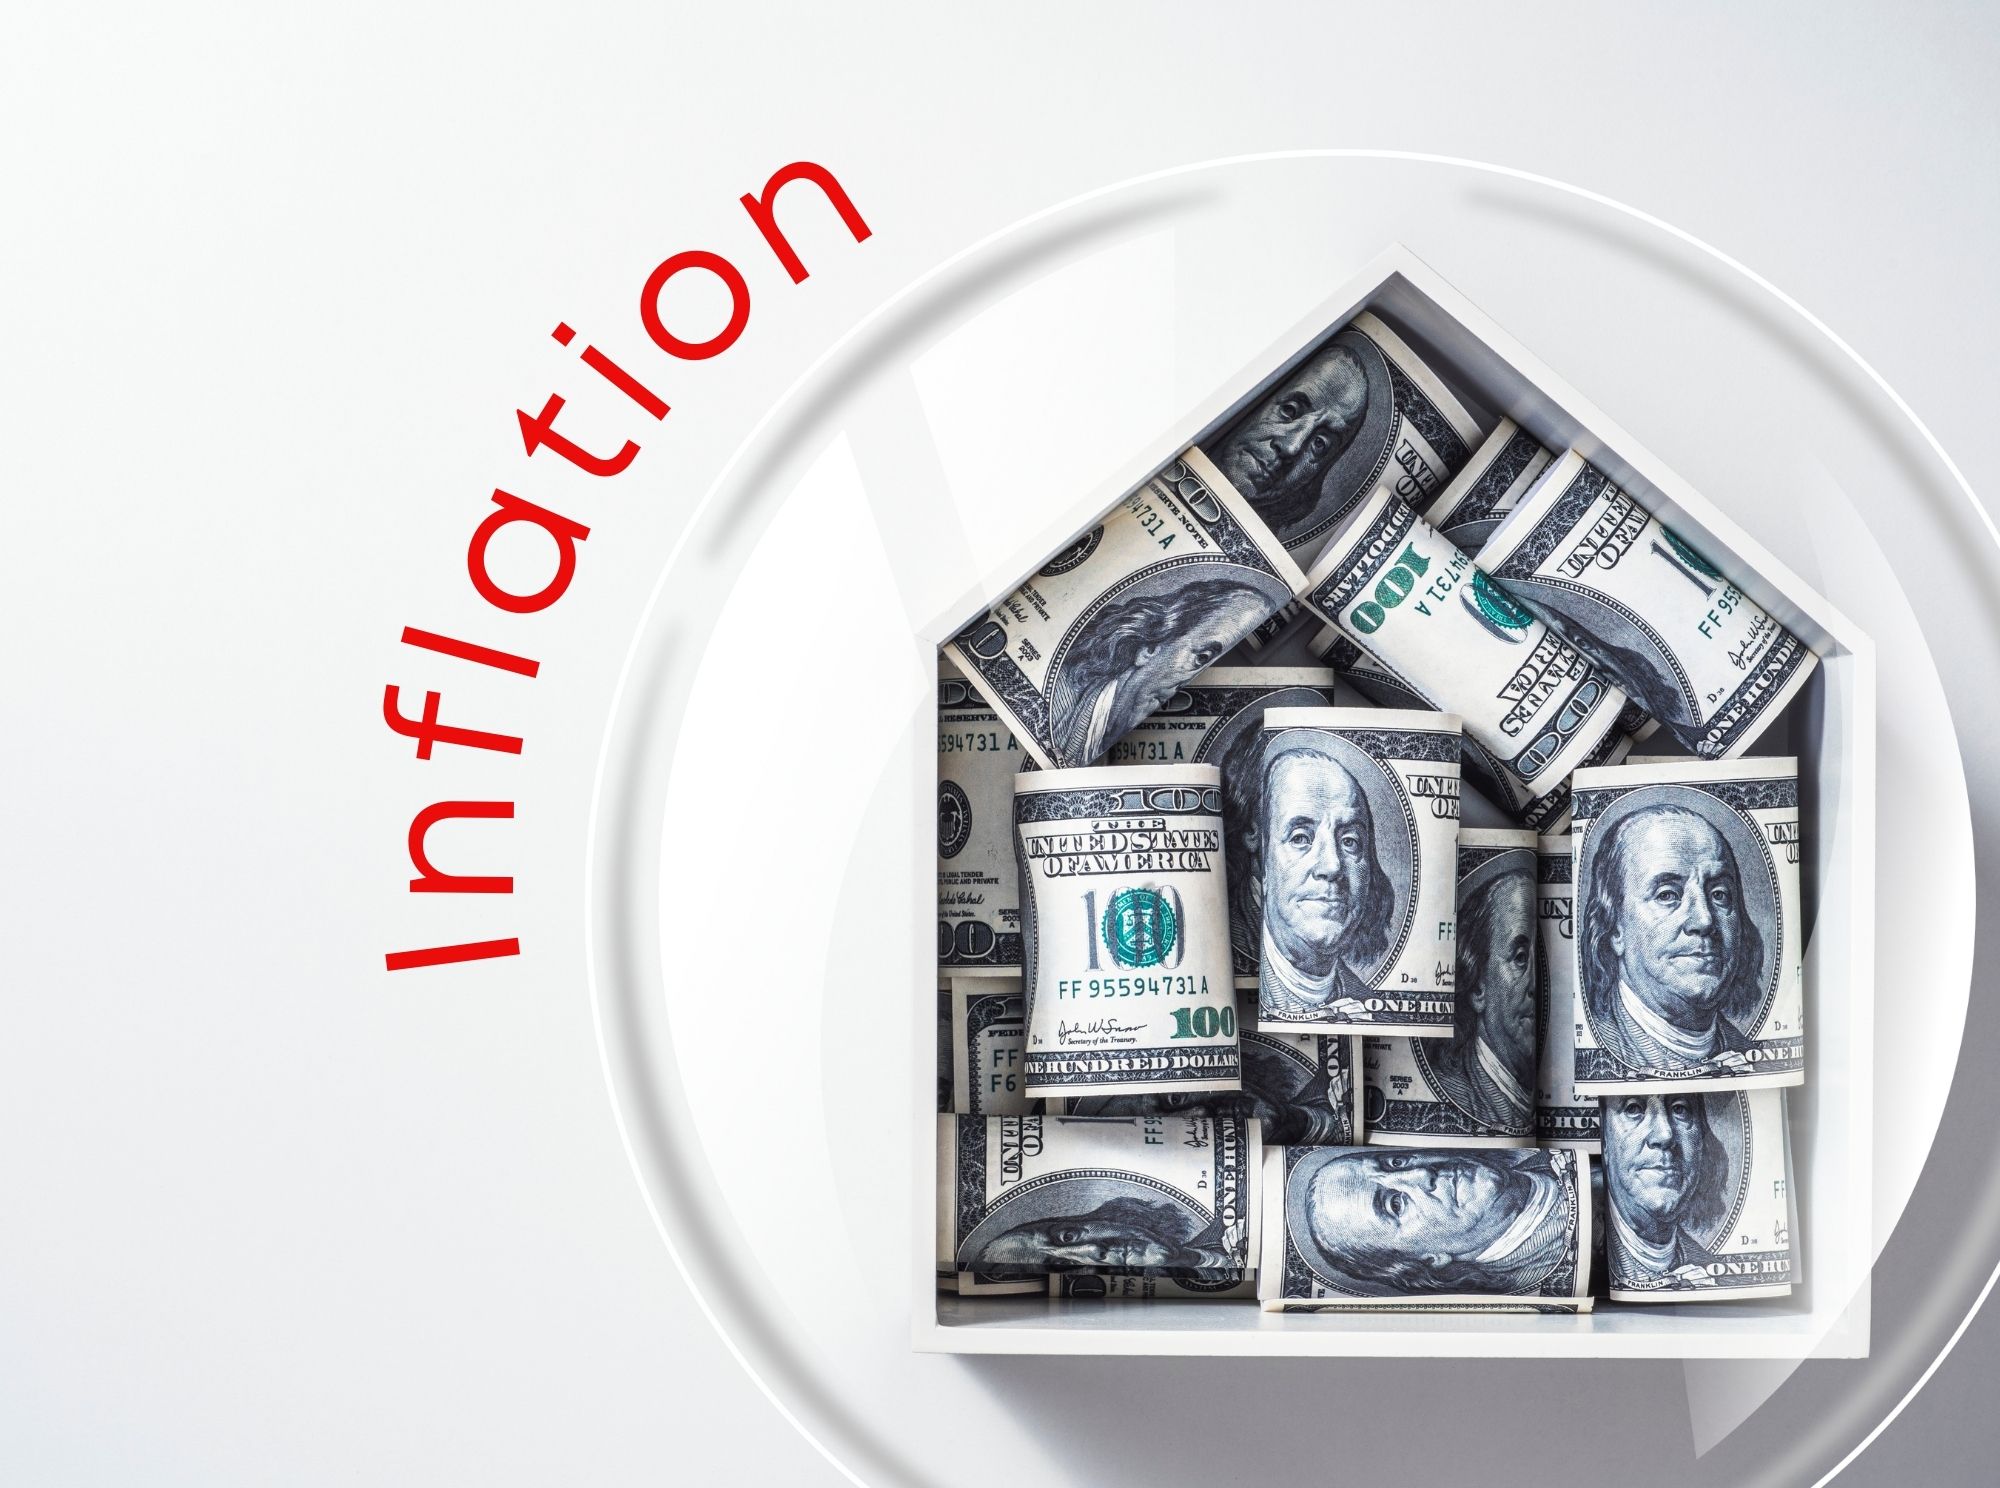 Owning a Home Helps Protect Against Inflation